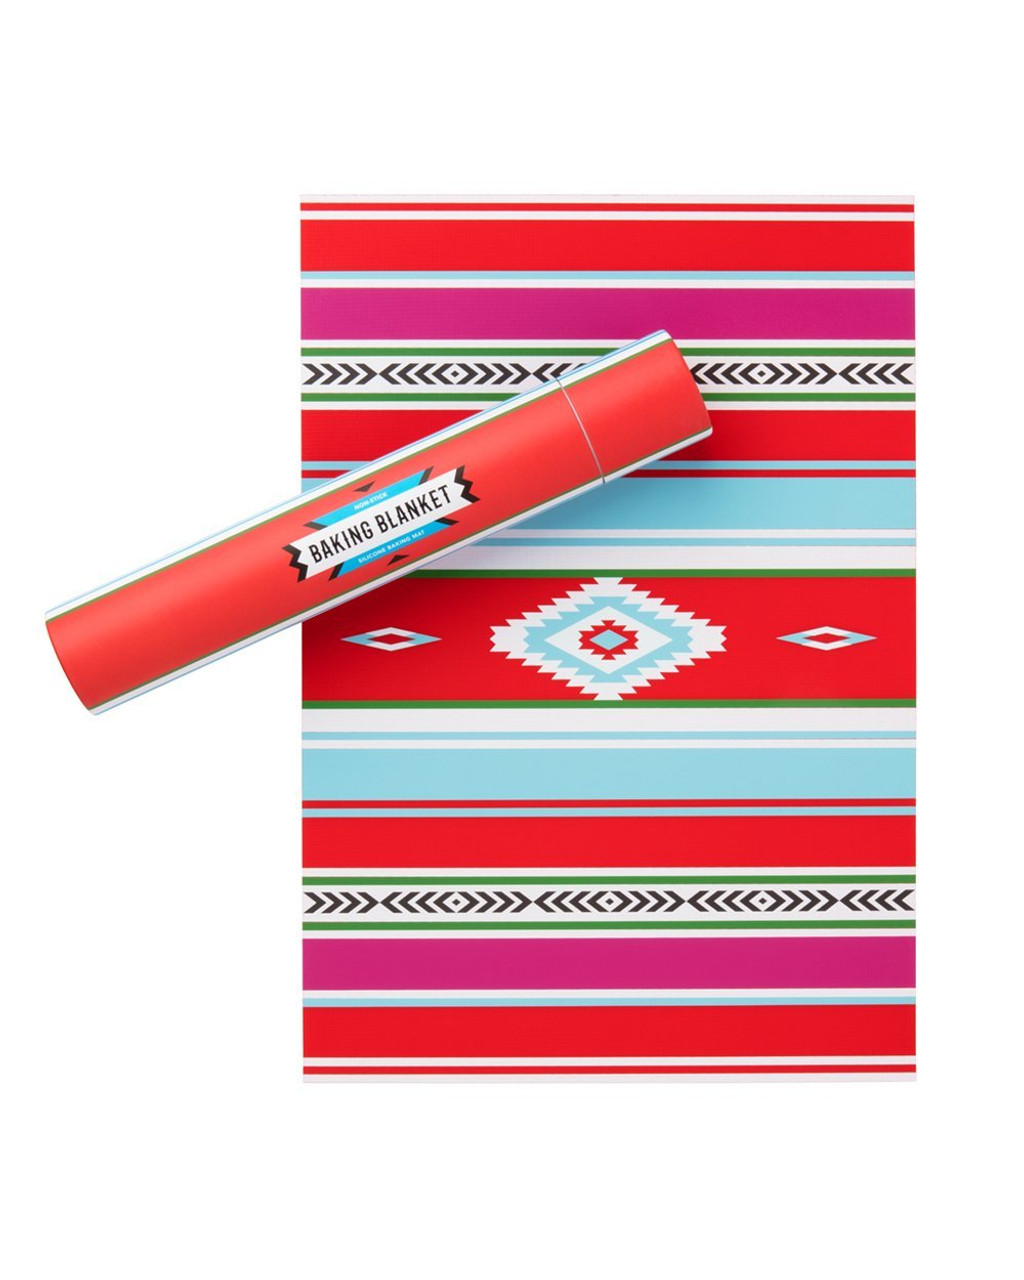 https://cdn11.bigcommerce.com/s-5bdhee5215/images/stencil/1280x1280/products/2357/5884/DT_VM_Baking_Blanket_Red_Product_02_4x5_Web_1000x1250_crop_center__95901.1561484094.jpg?c=2